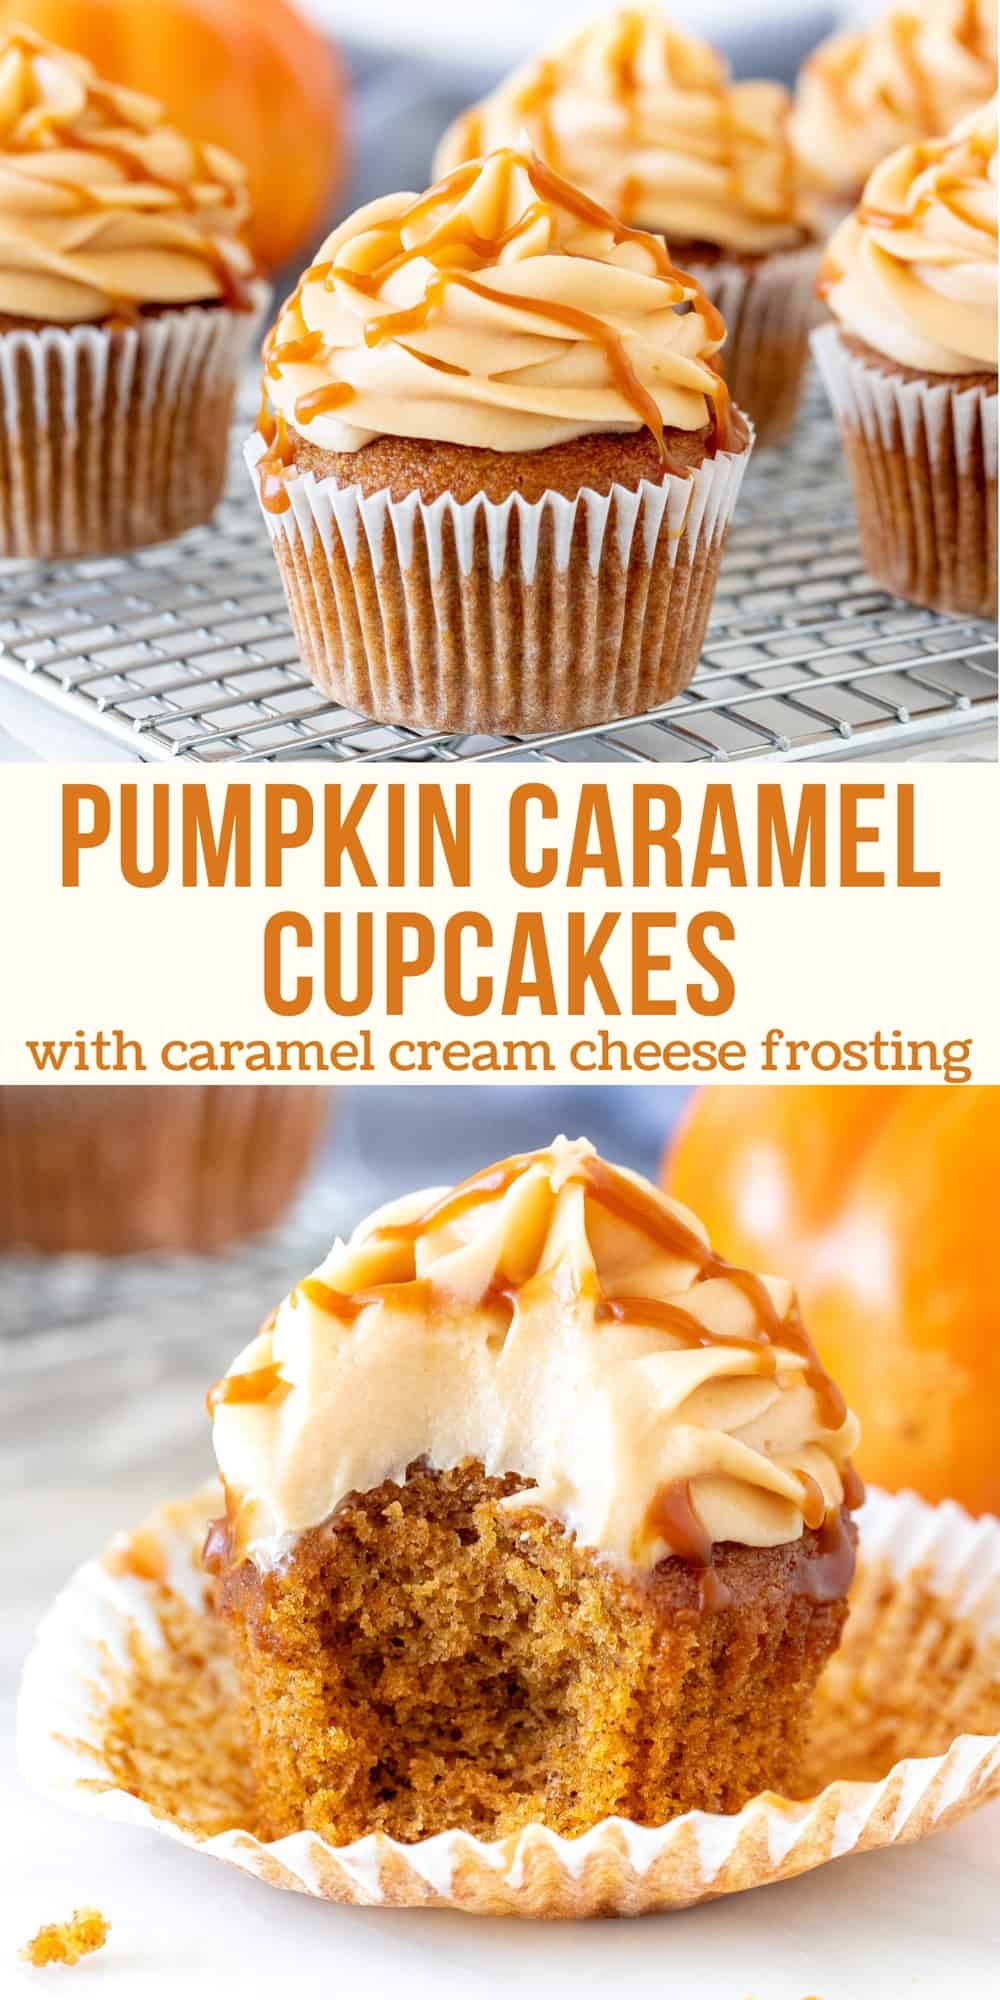 Pumpkin Cupcakes with Caramel Cream Cheese Frosting - Just so Tasty